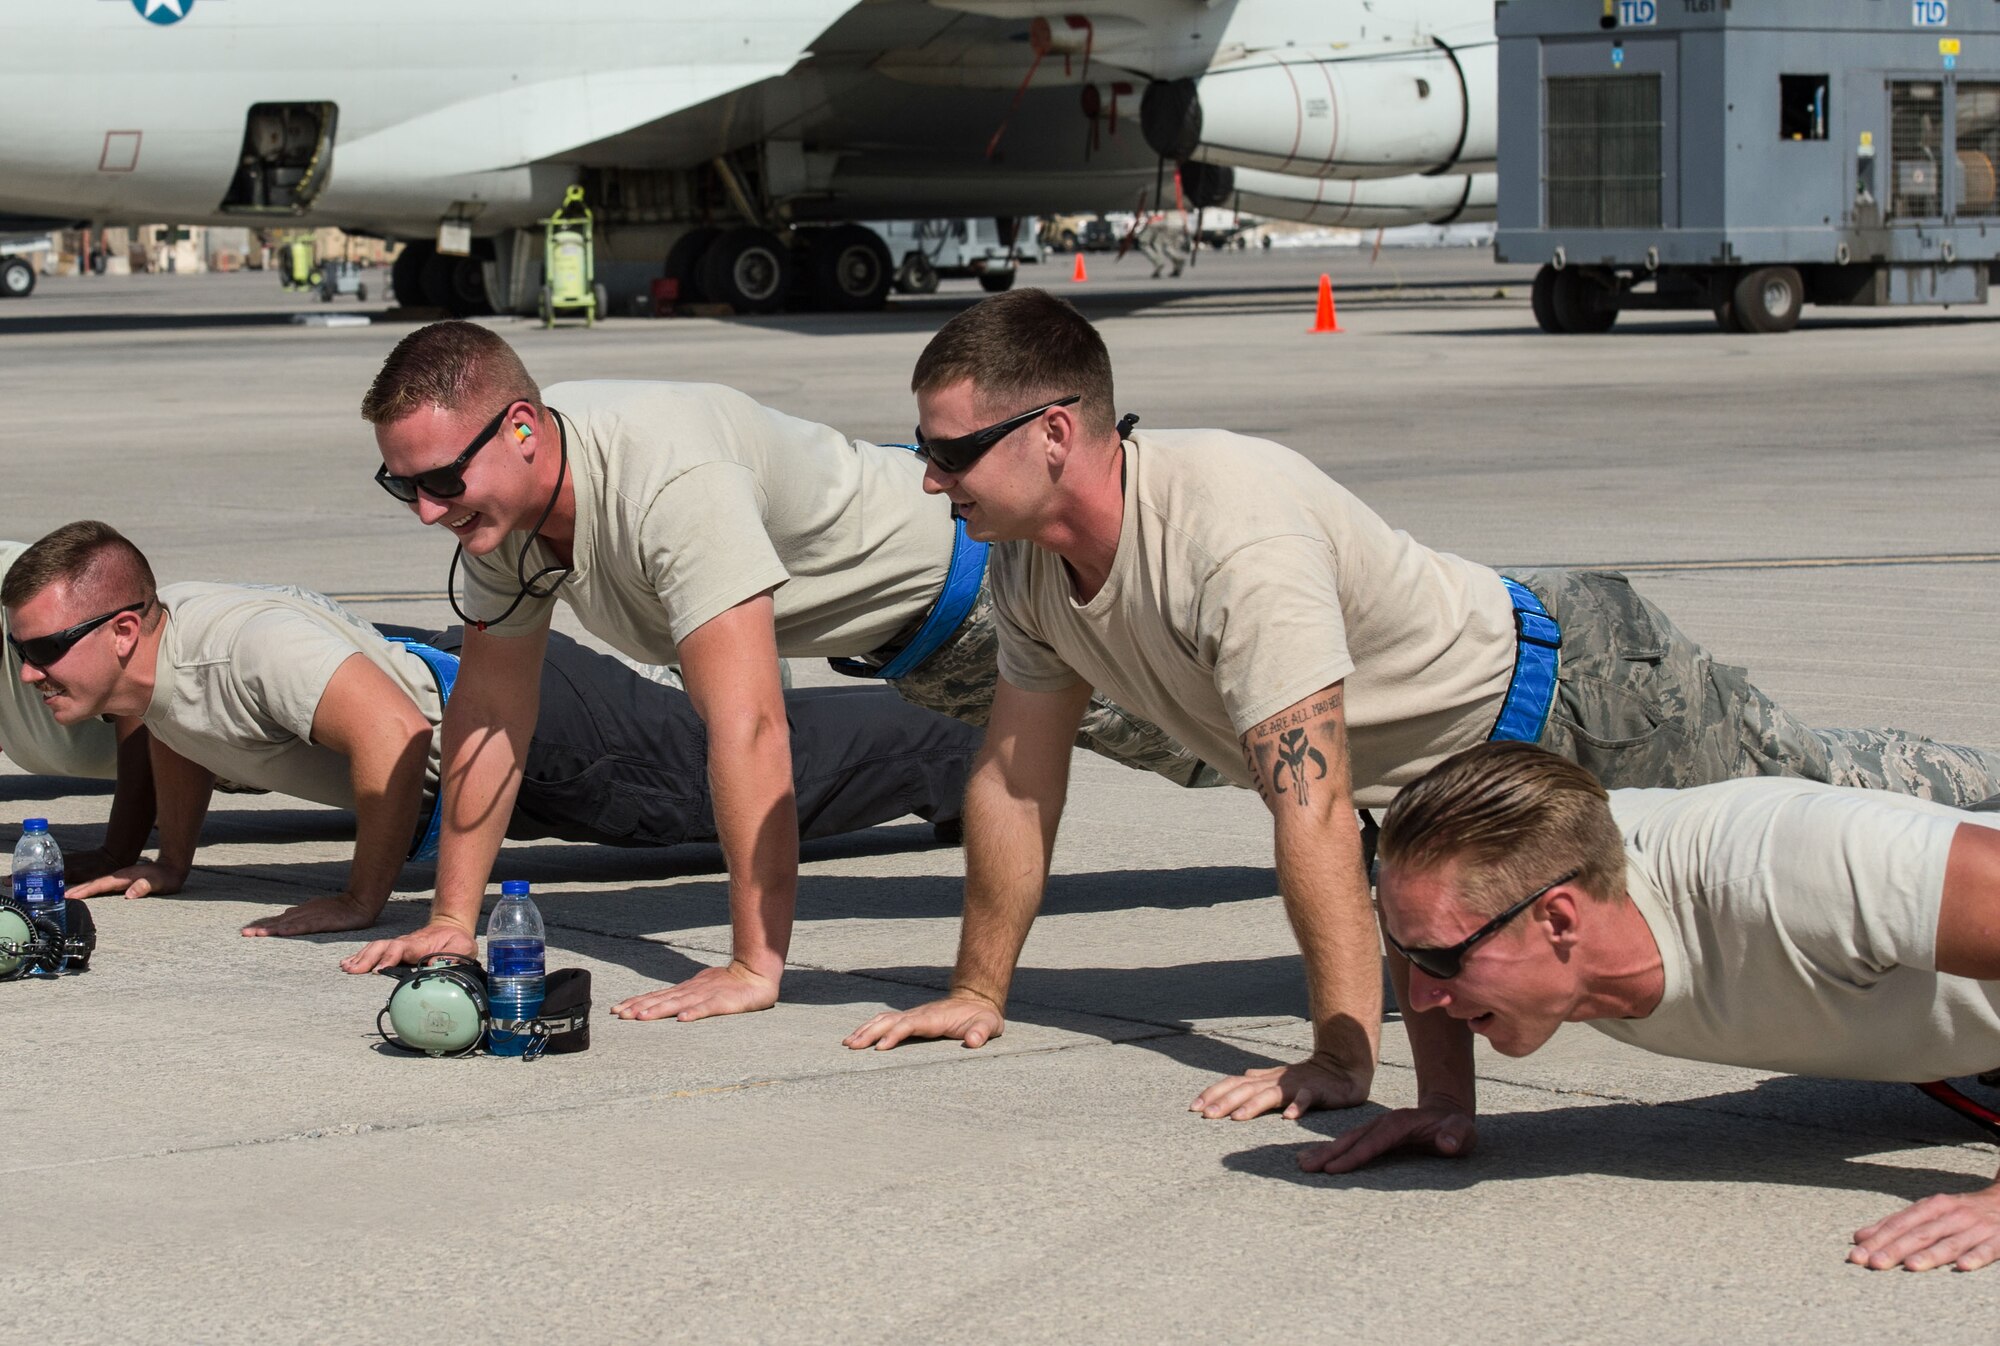 380th Expeditionary Aircraft Maintenance Squadron Airmen laugh while completing pushups during an E-3 Sentry departure at an undisclosed location in Southwest Asia, Feb. 2, 2017. The E-3 Sentry maintainers complete as many push-ups as possible while the aircraft takes off. Since November 2016, no E-3 Sentry has missed a scheduled sortie due to maintenance issues. (U.S. Air Force photo by Senior Airman Tyler Woodward)